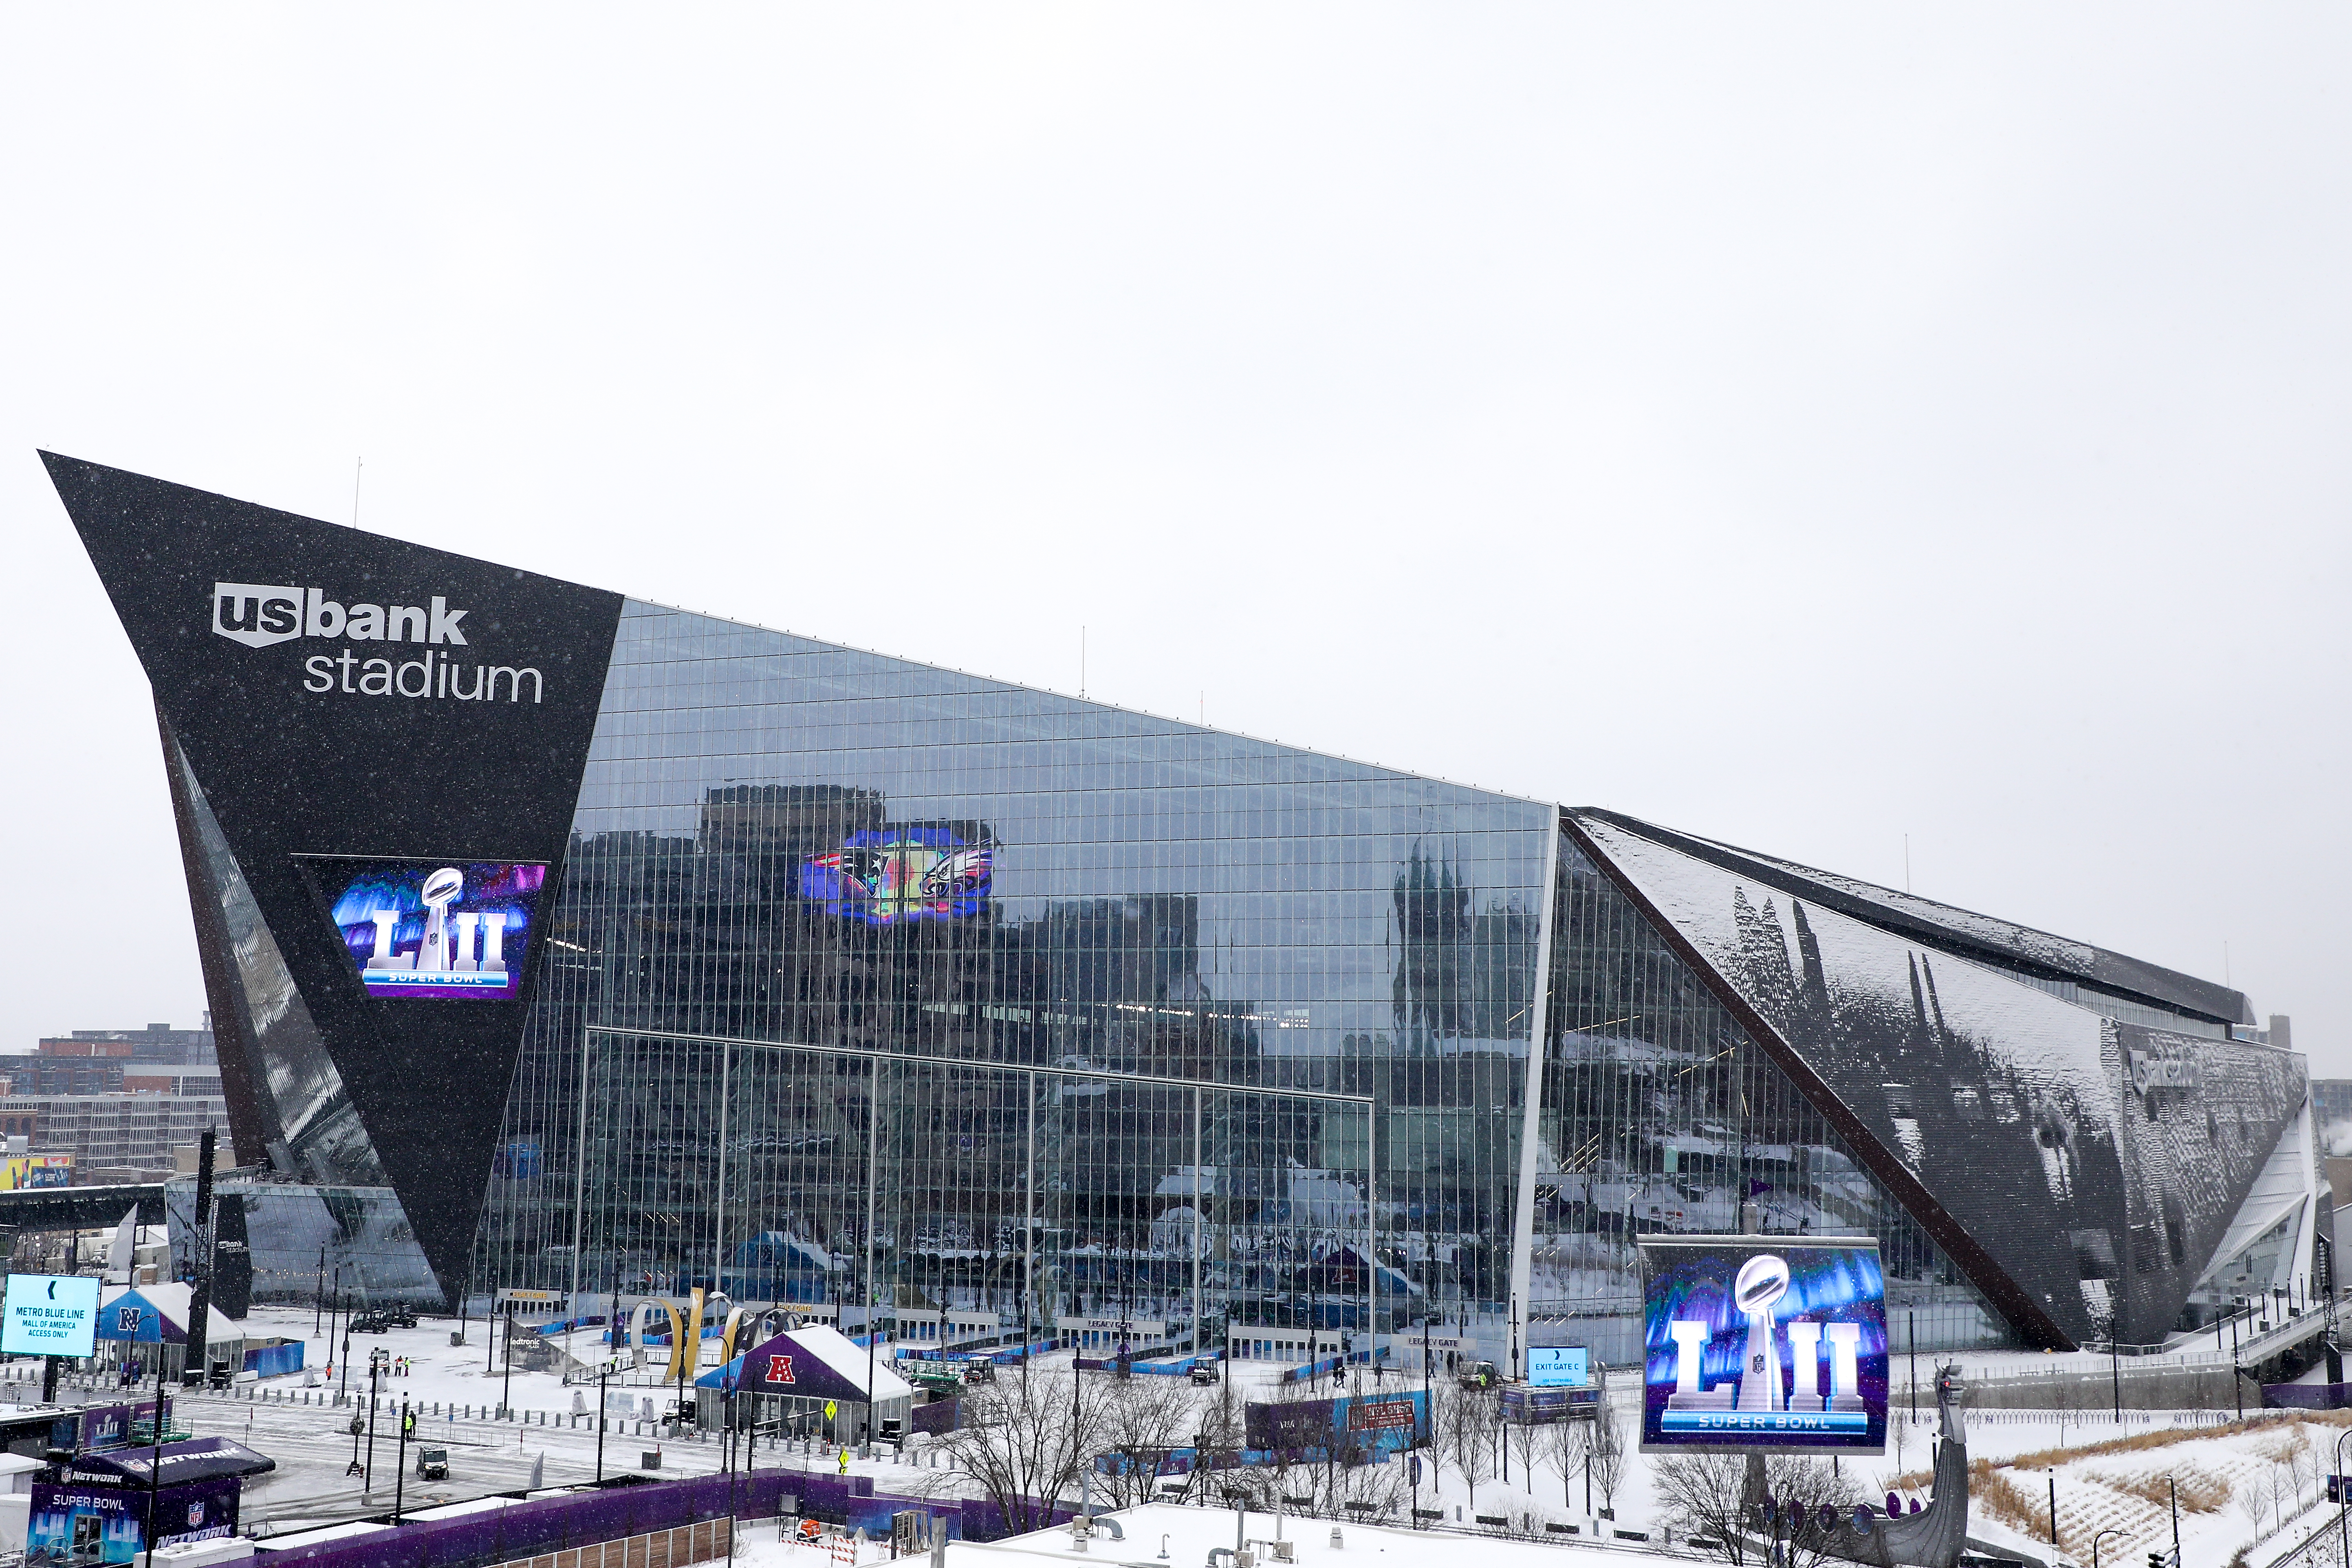 A general view of US Bank Stadium on February 3, 2018 in Minneapolis, Minnesota. US Bank Stadium will host Super Bowl LII on February 4th between the Philadelphia Eagles and the New England P